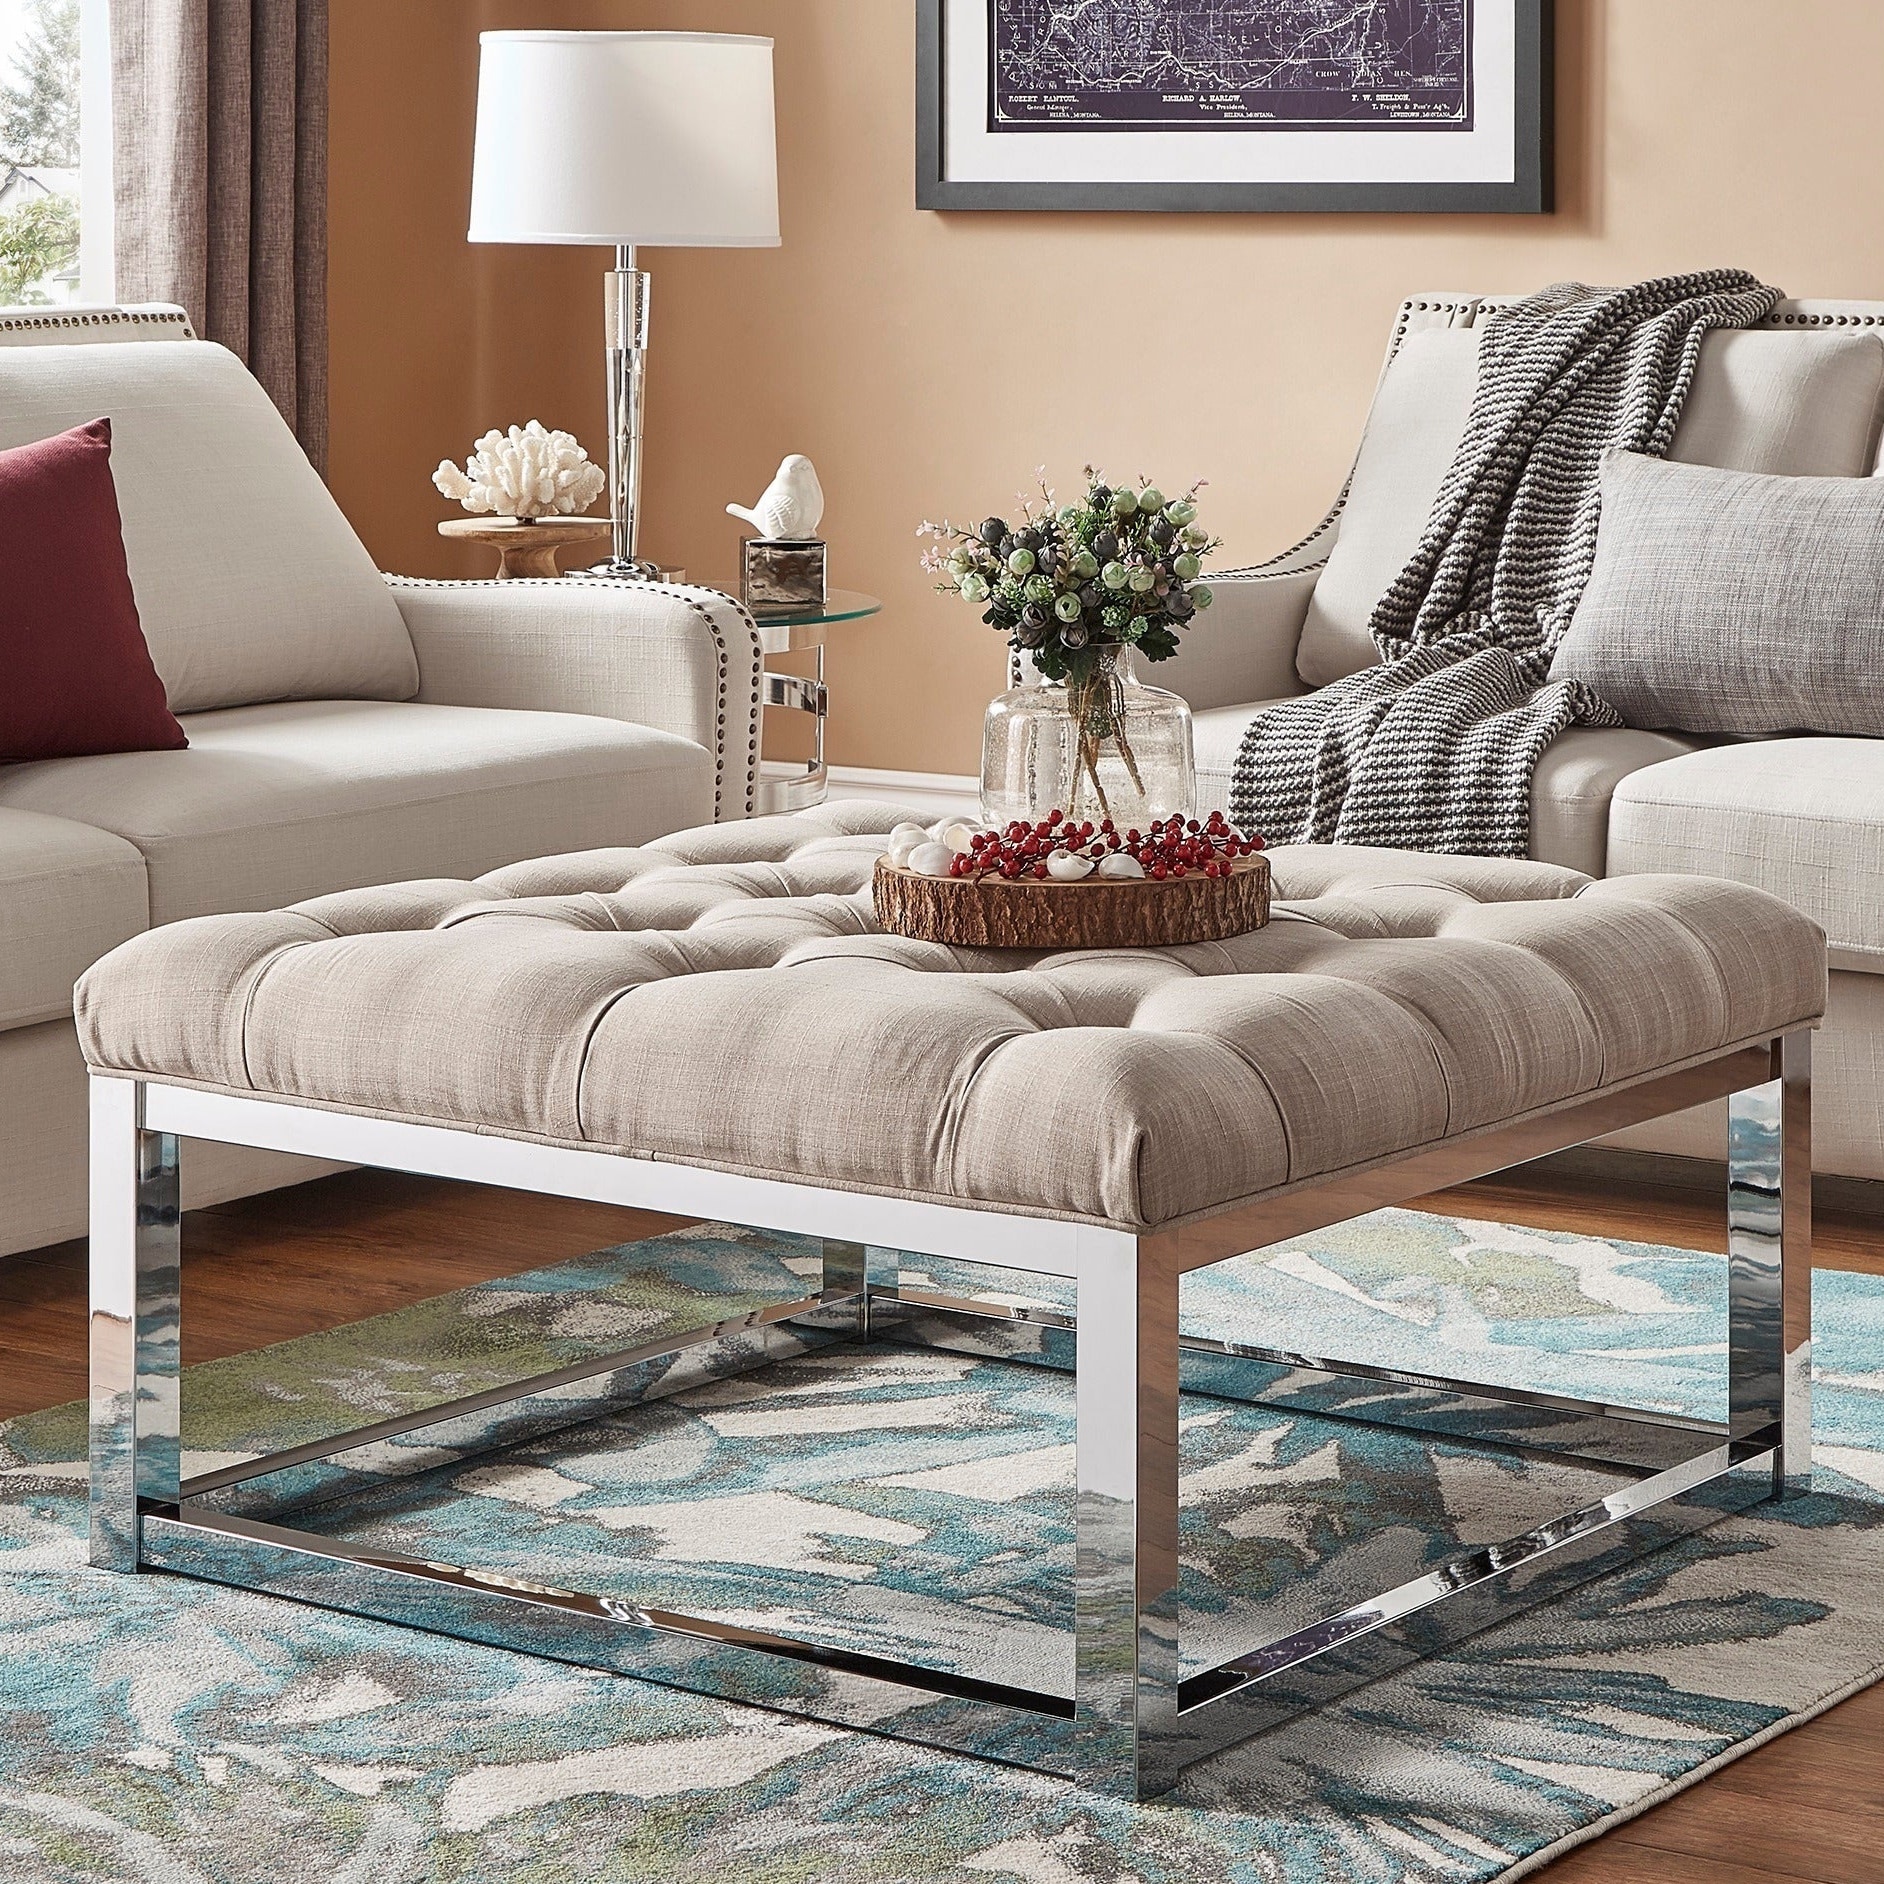 Solene Square Base Ottoman Coffee Table Chrome By Inspire Q Bold On Sale Overstock 13470706